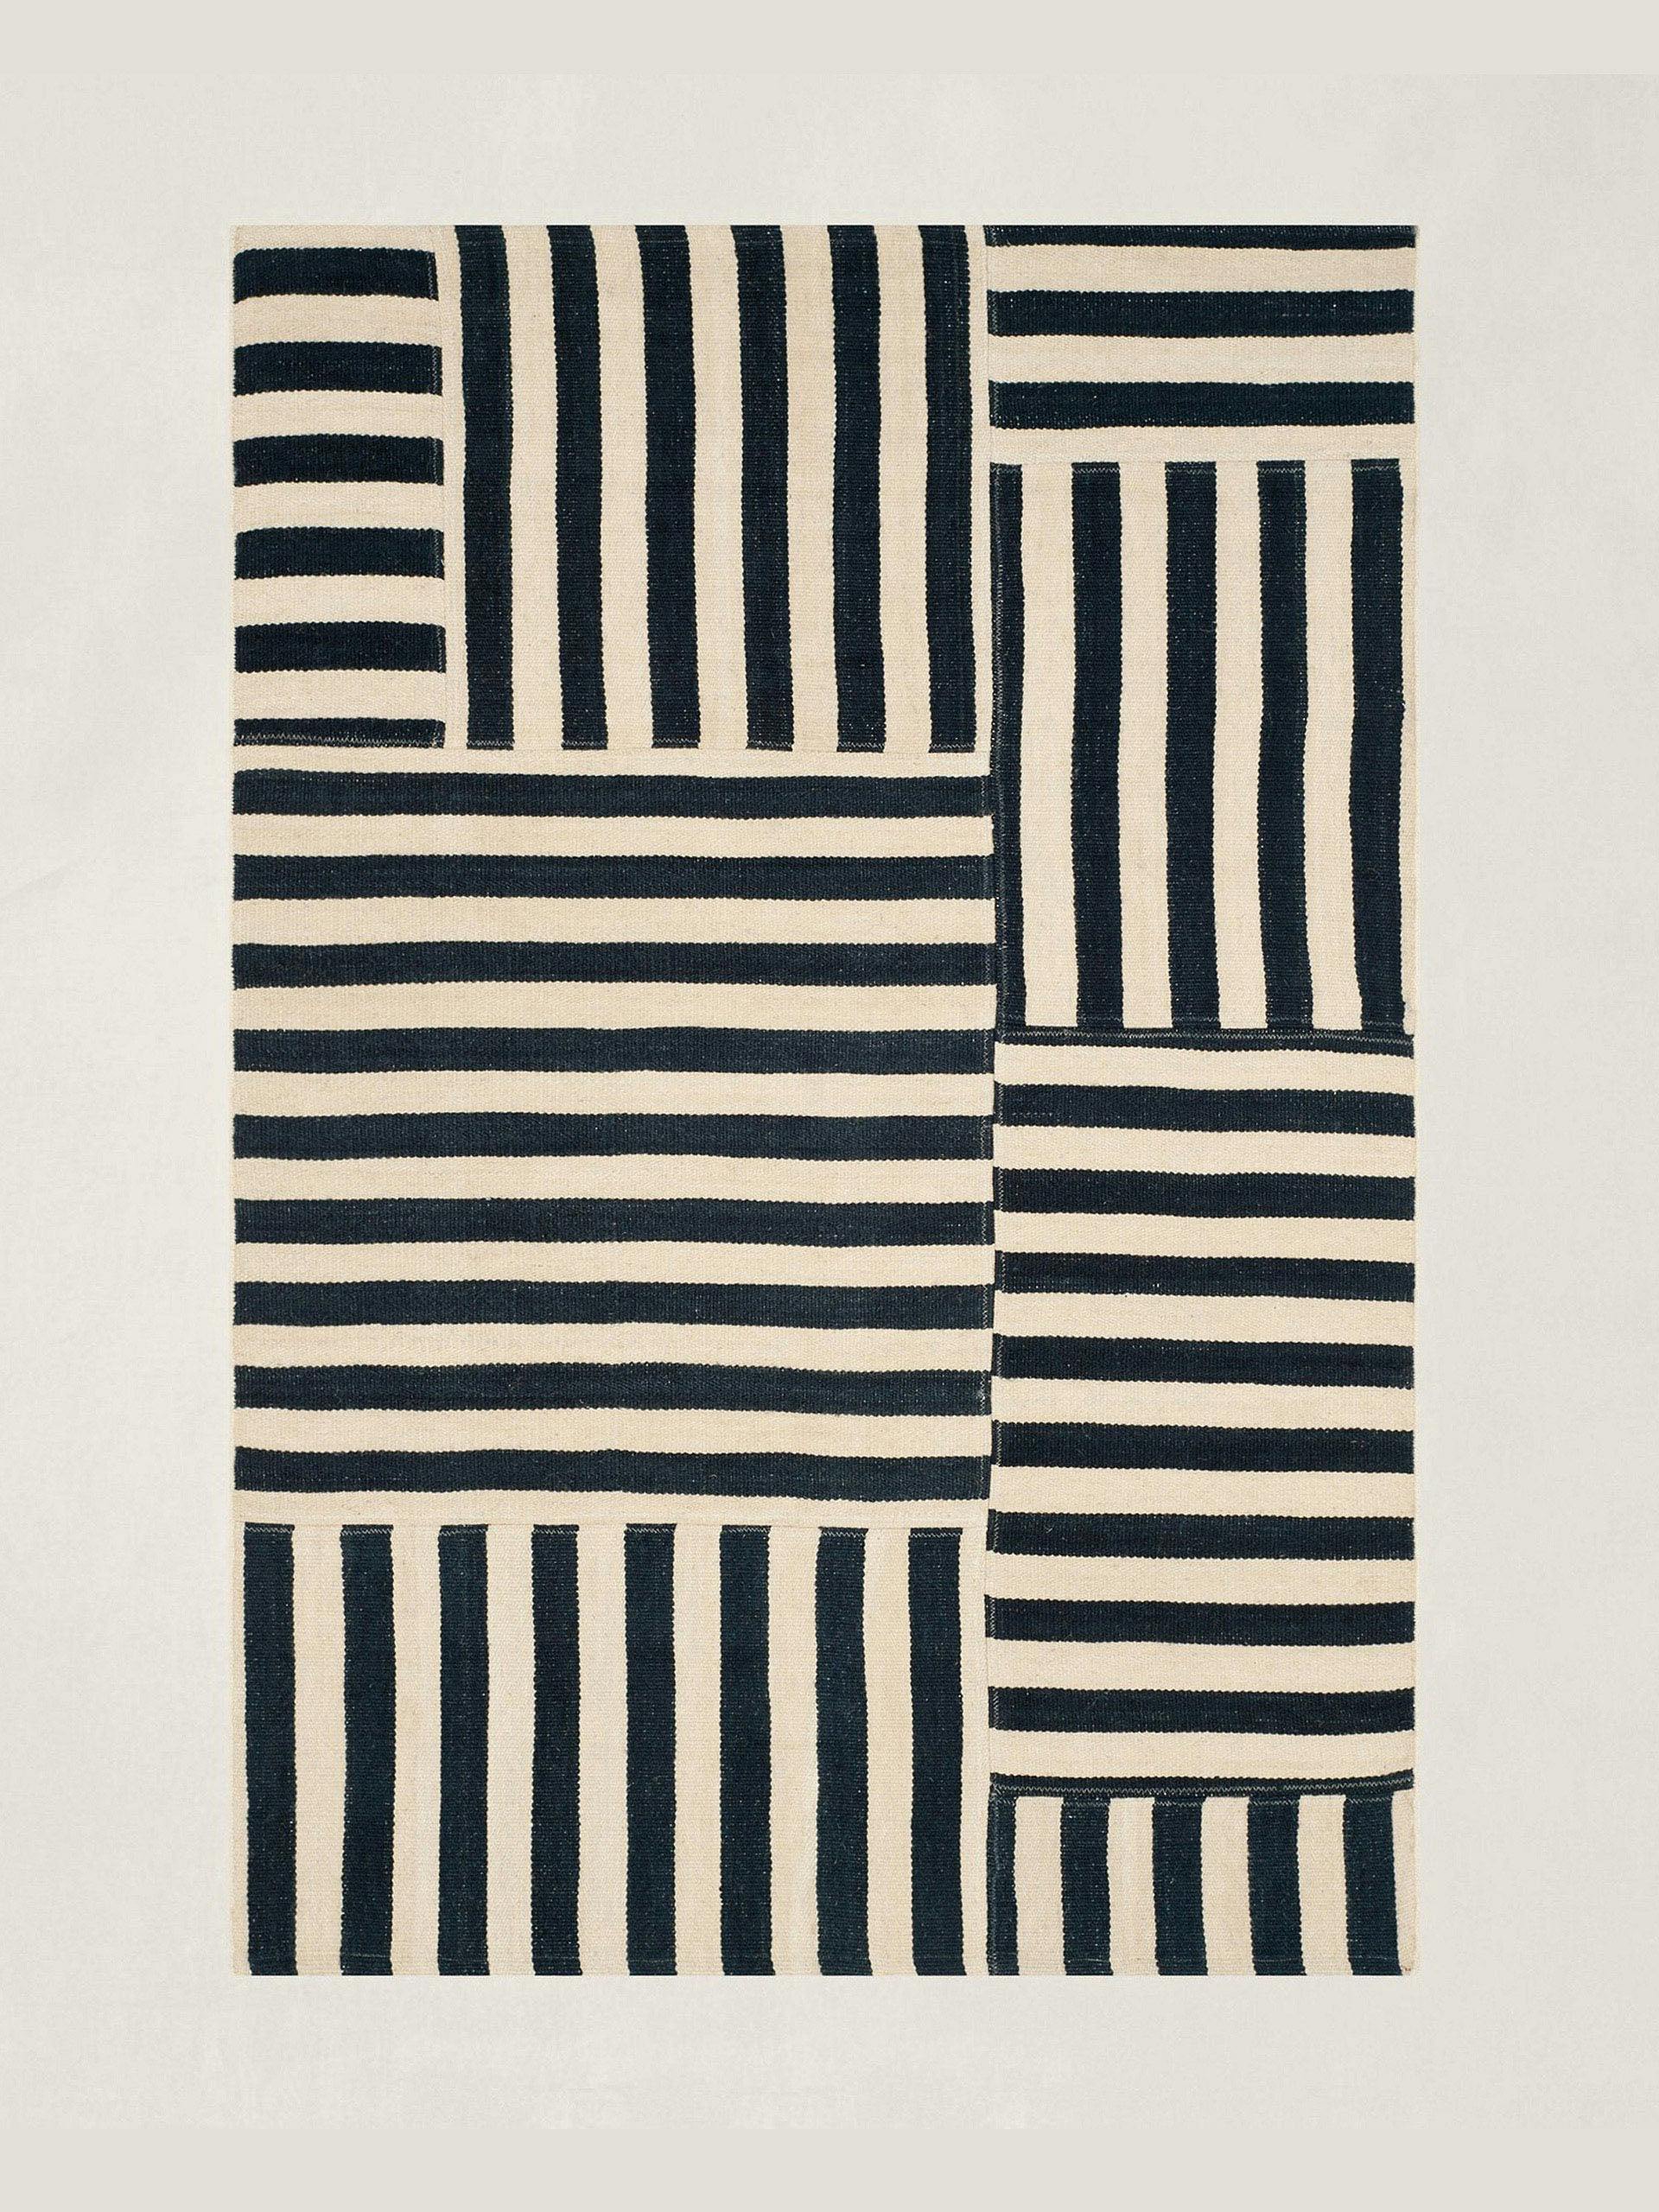 Flat-woven striped patchwork rug in cinder